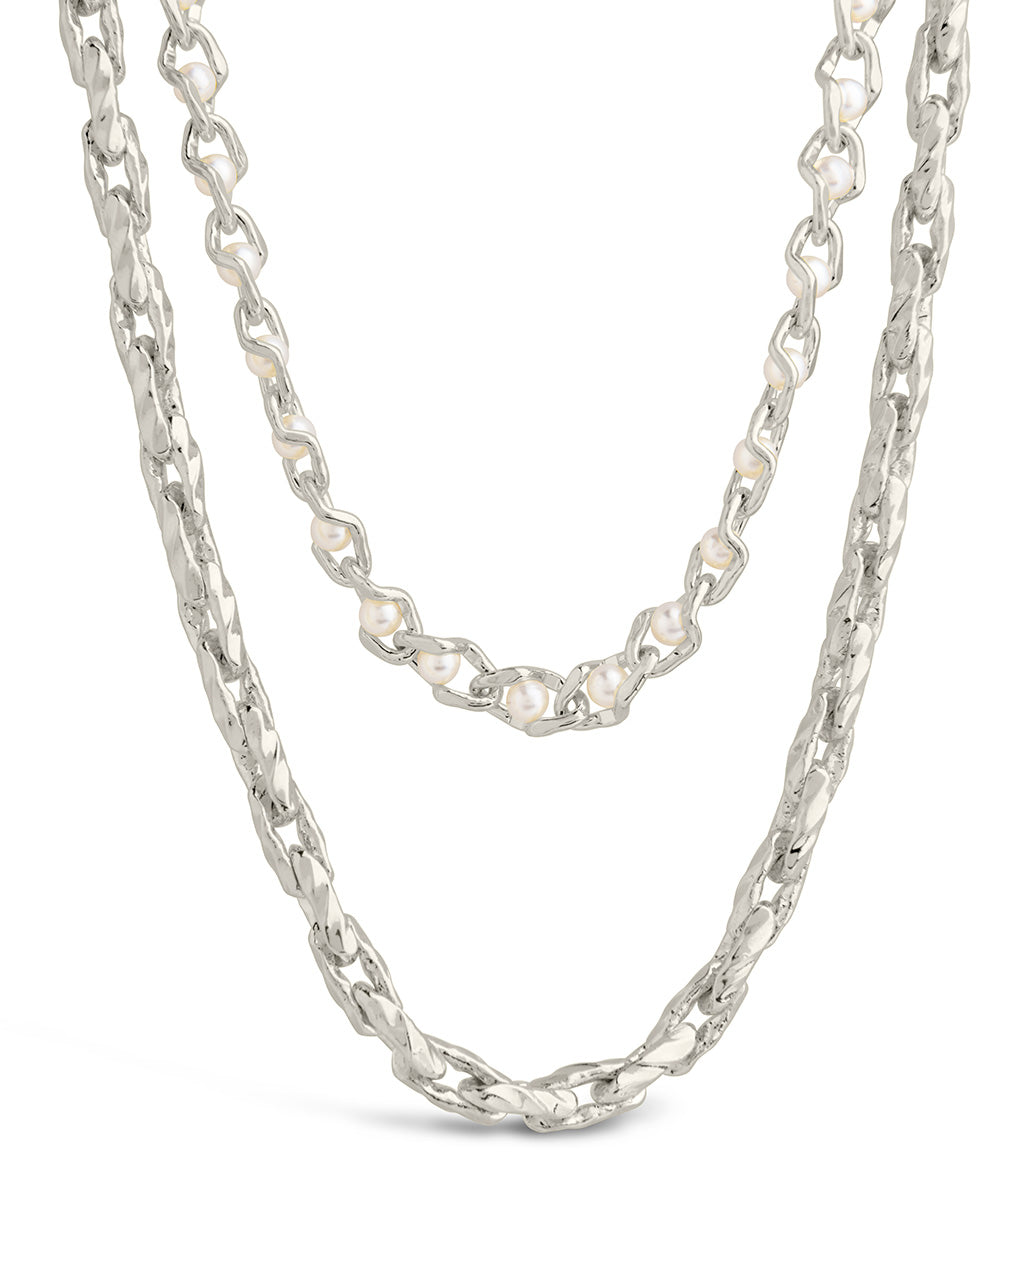 Amedea Layered Necklace Necklace Sterling Forever Silver 